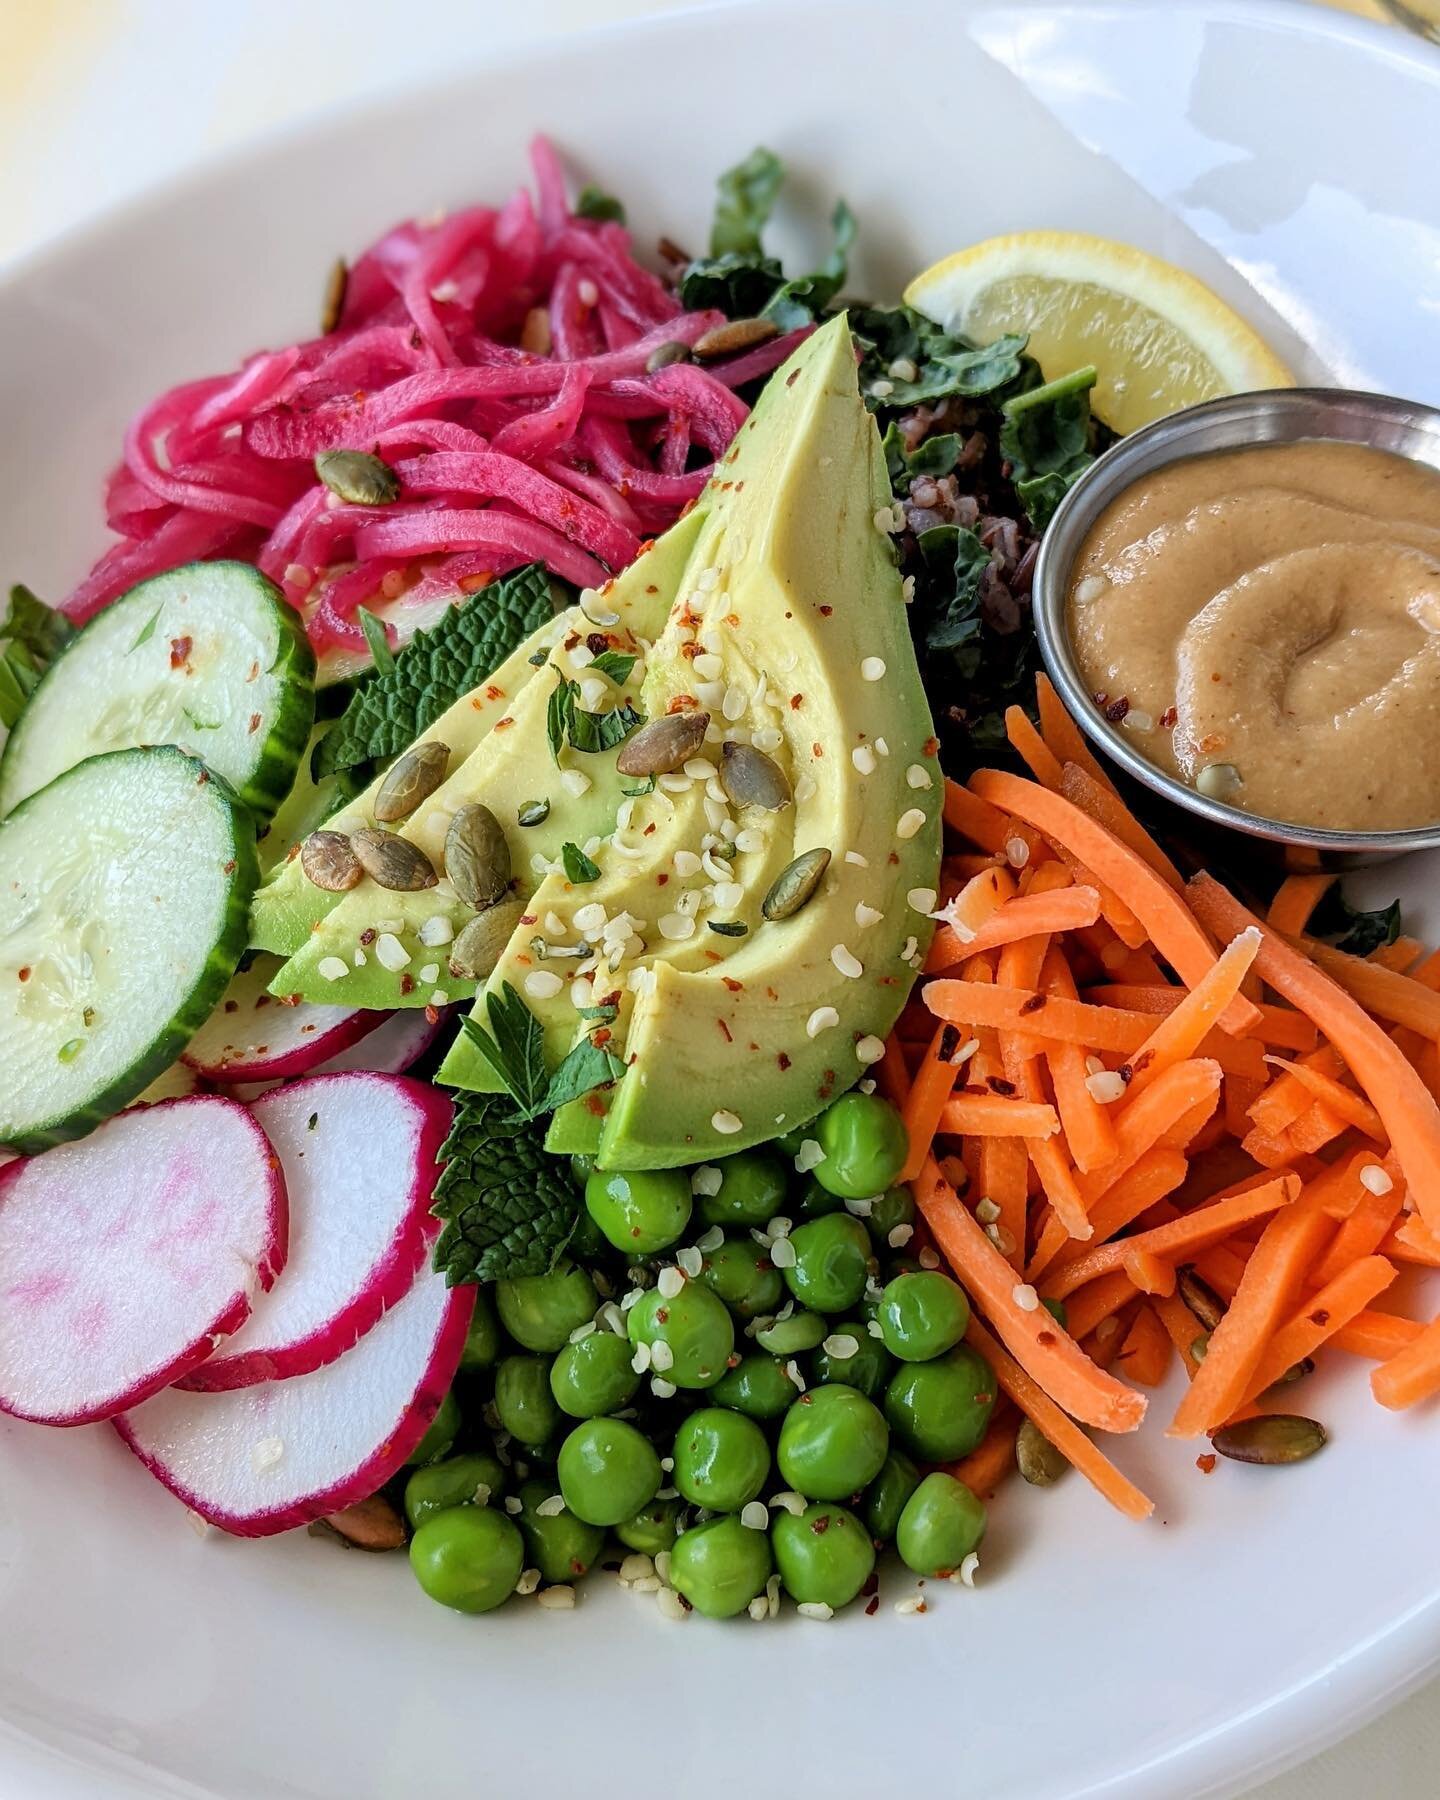 Brighten up tonight&rsquo;s dinner with our colorful Himalayan Red Rice bowl 🌈👌🥰

🌱 himalayan red rice&nbsp;
🌱 kale
🌱 avocado
🌱 seasonal vegetables
🌱 pickled onions
🌱 house-made cashew sauce

Head to the link in our bio to make a reservation